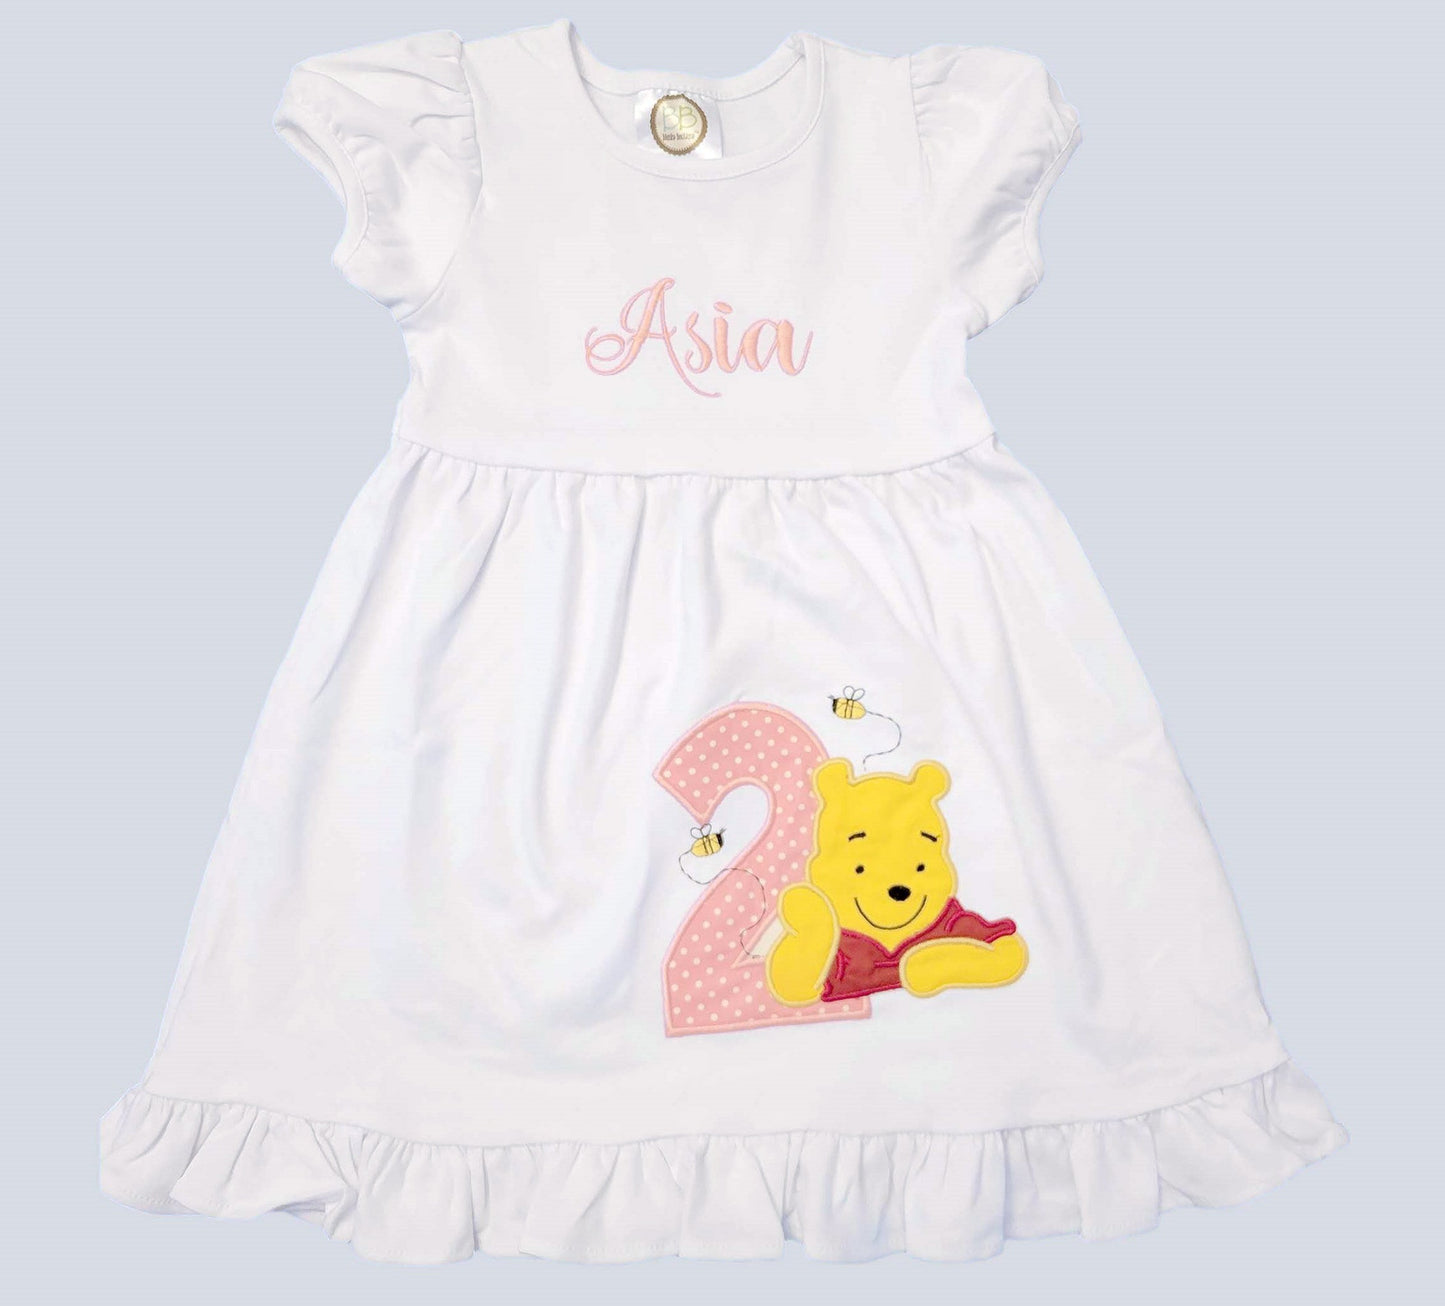 Winnie the Pooh Dress, Pooh Birthday outfit,    Pooh Toddler Dress, Winnie the Pooh Personalized Girls  Dress